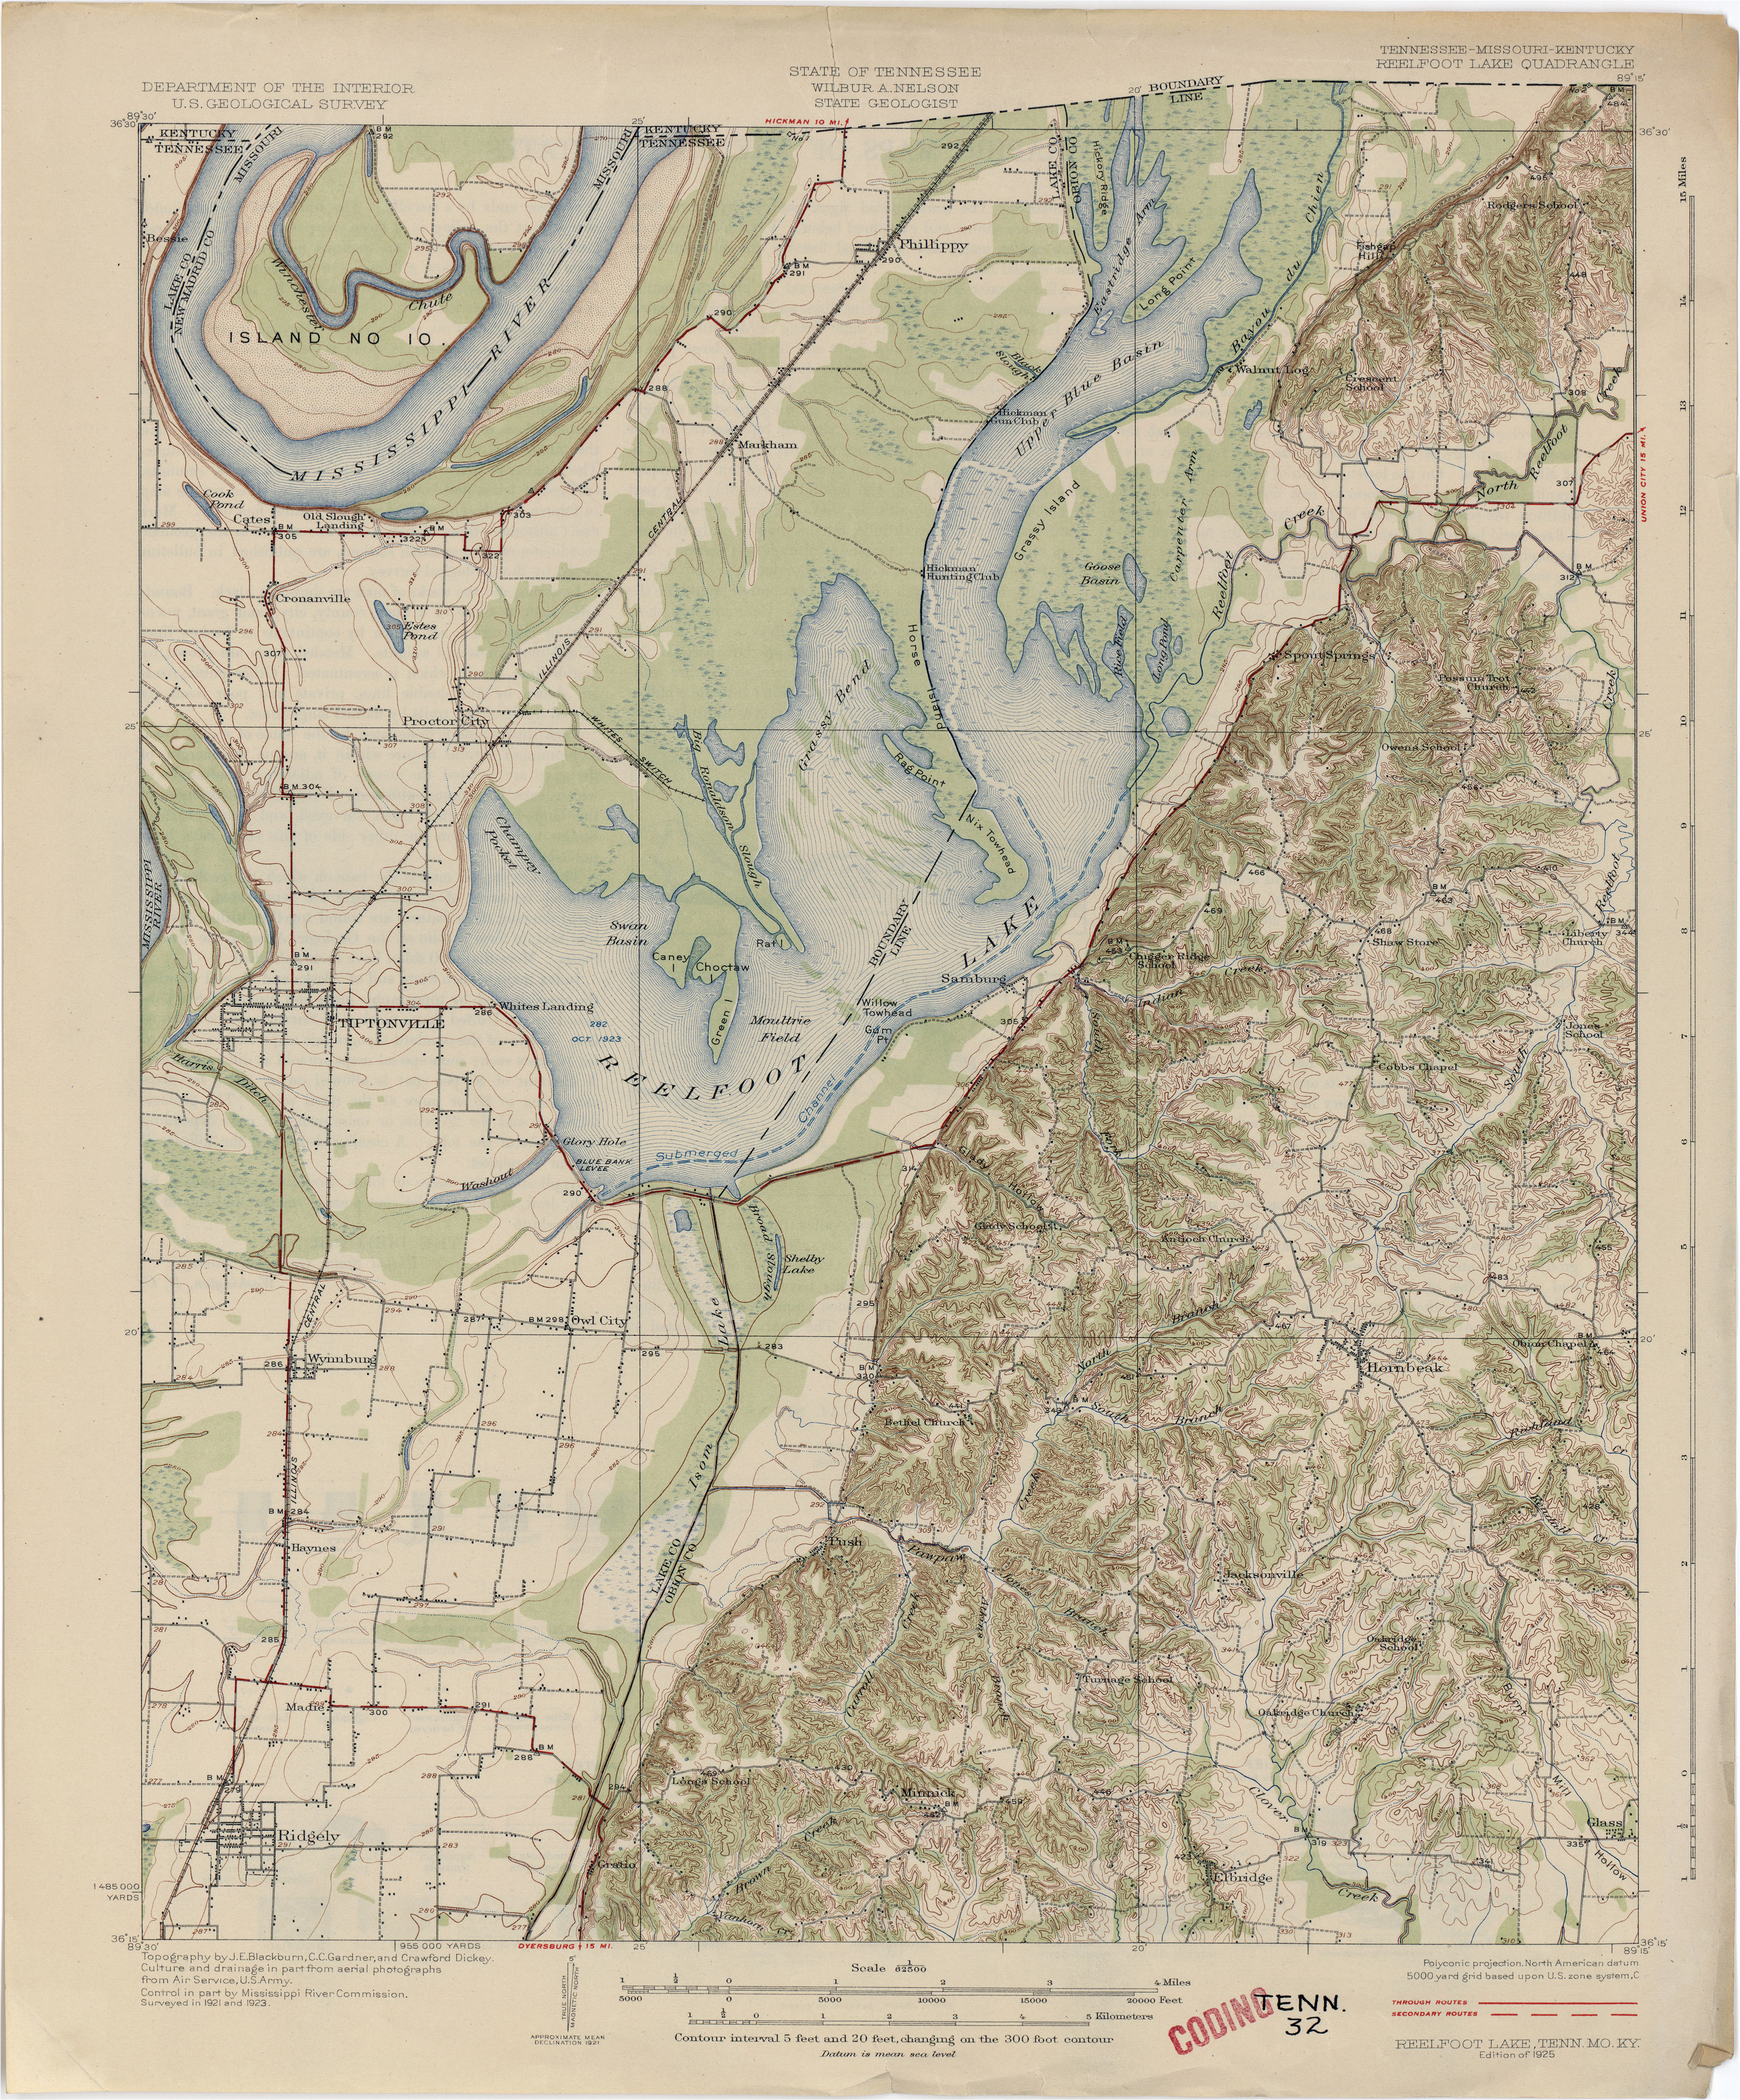 map of kentucky and tennessee beautiful map of kentucky cities